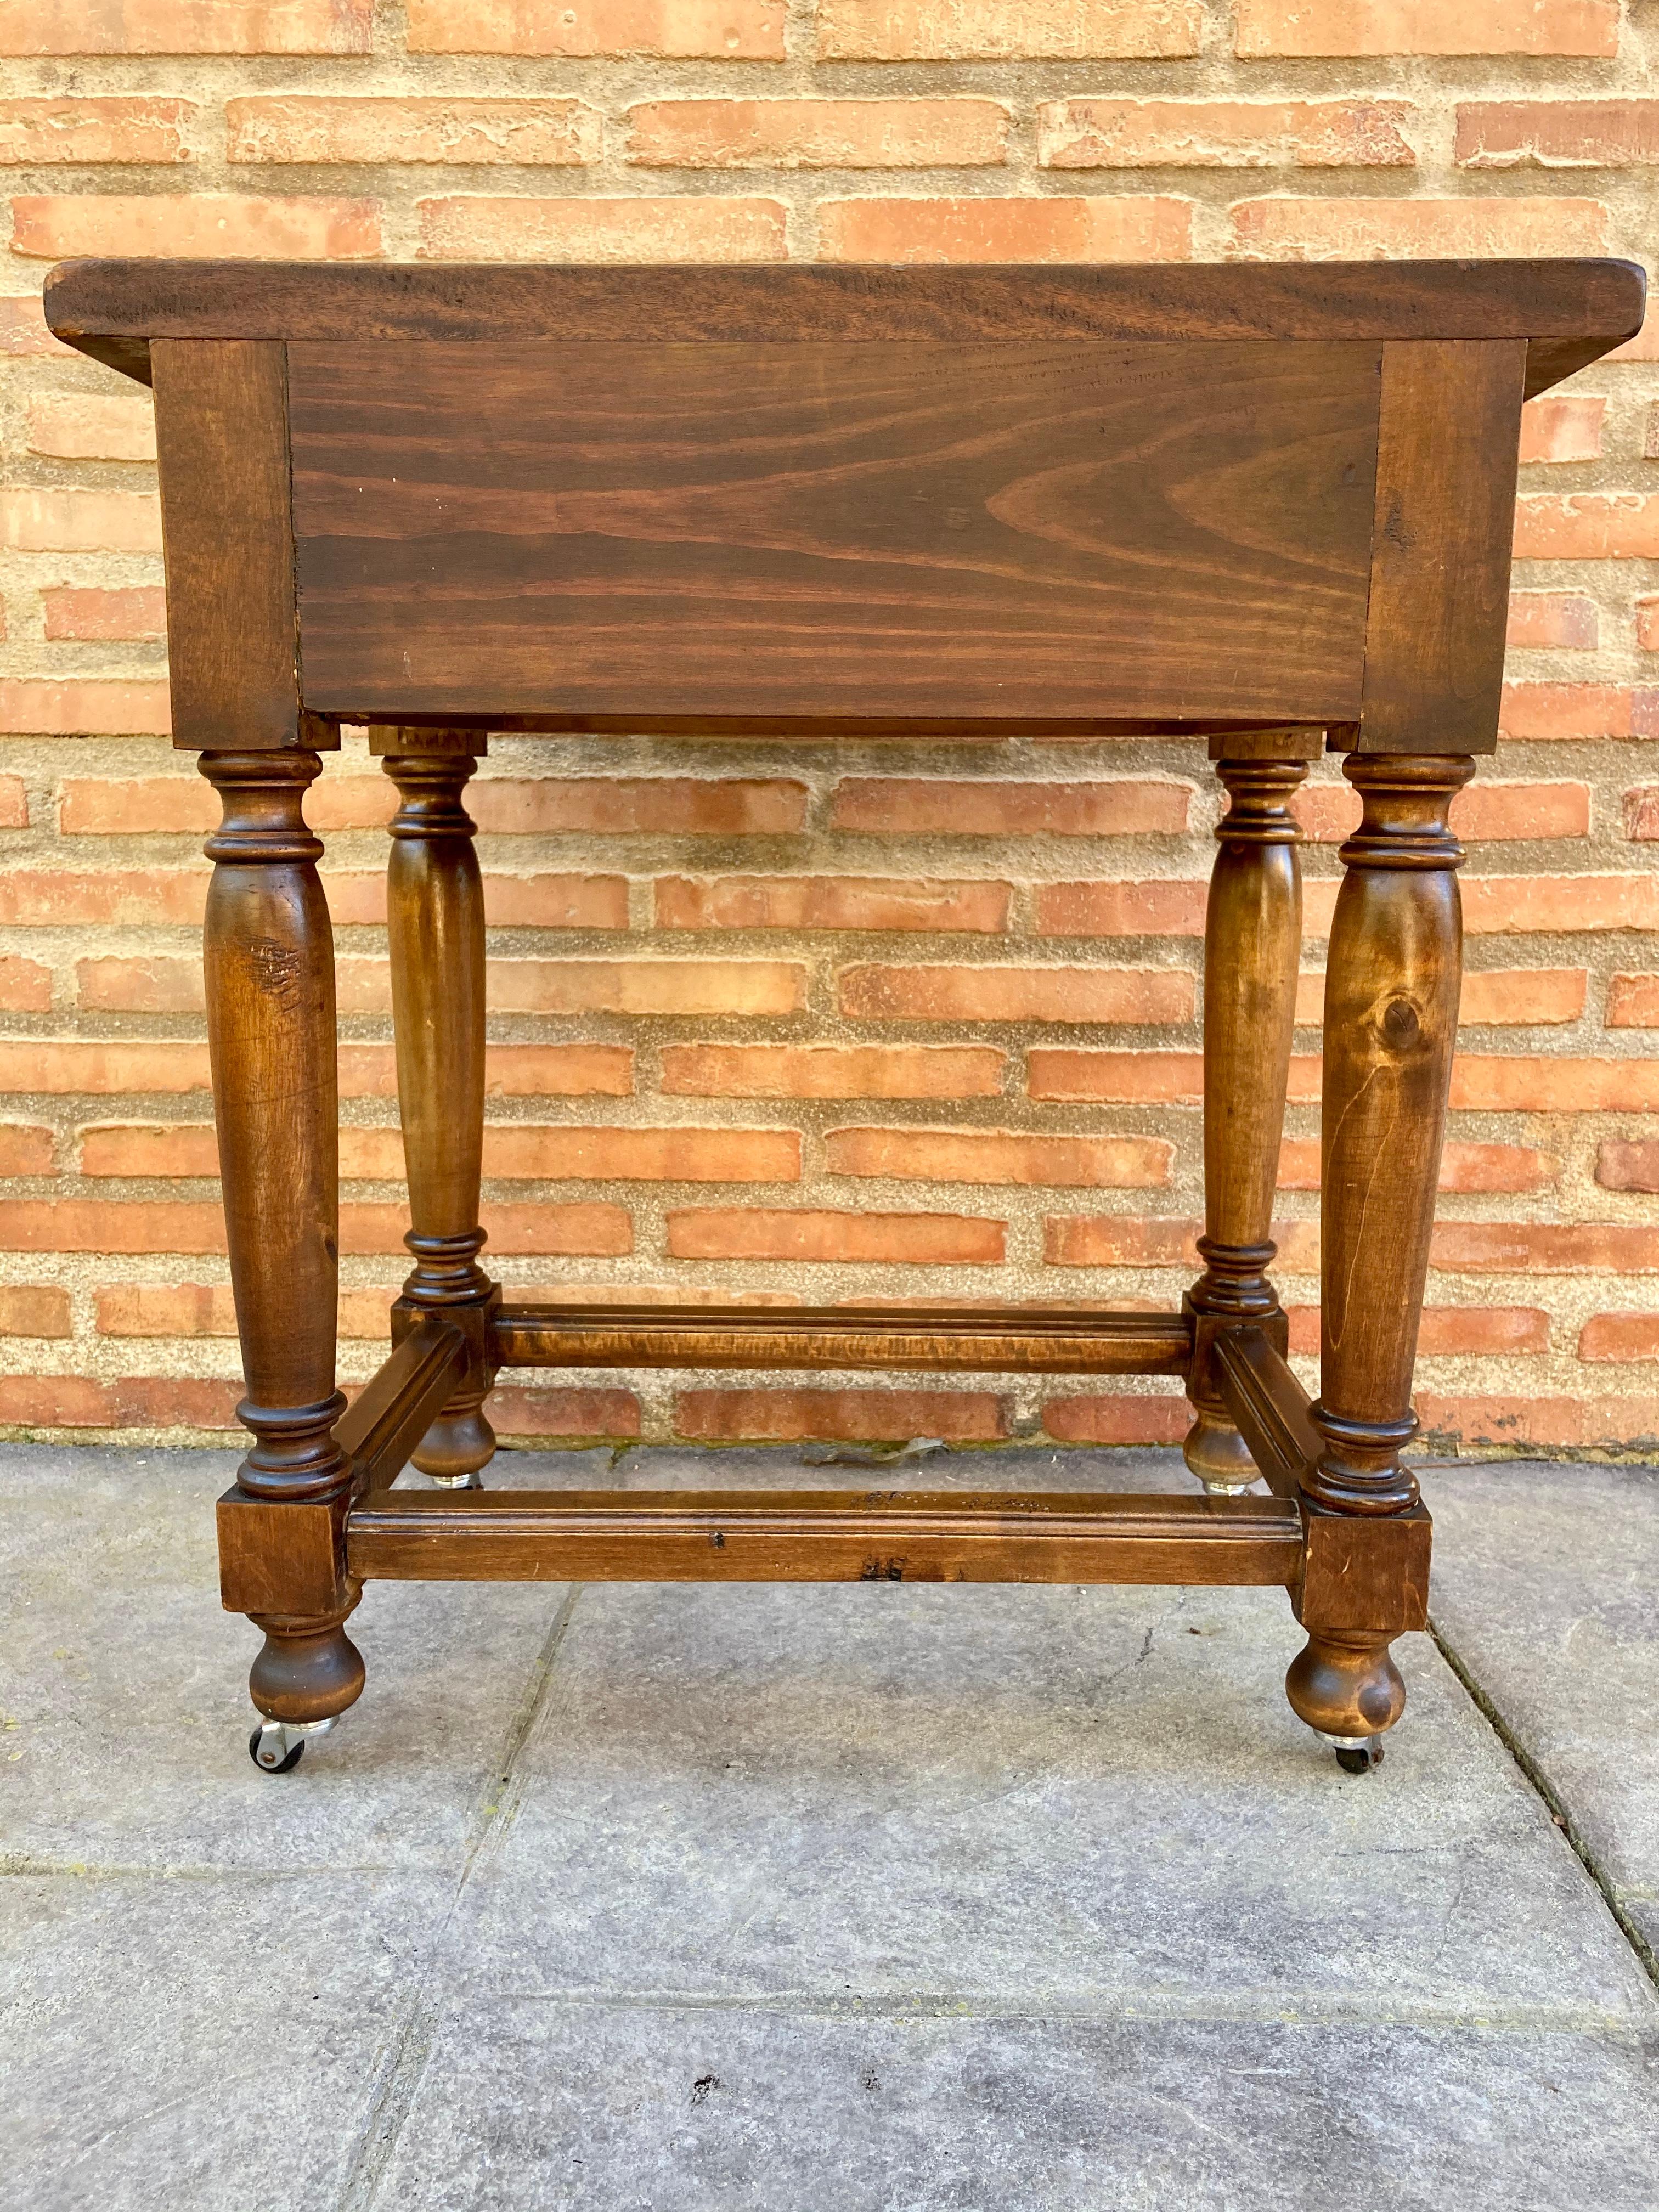 19th Century French Walnut Side Table with Drawer, Carved Arches and Column Legs with Wheels,